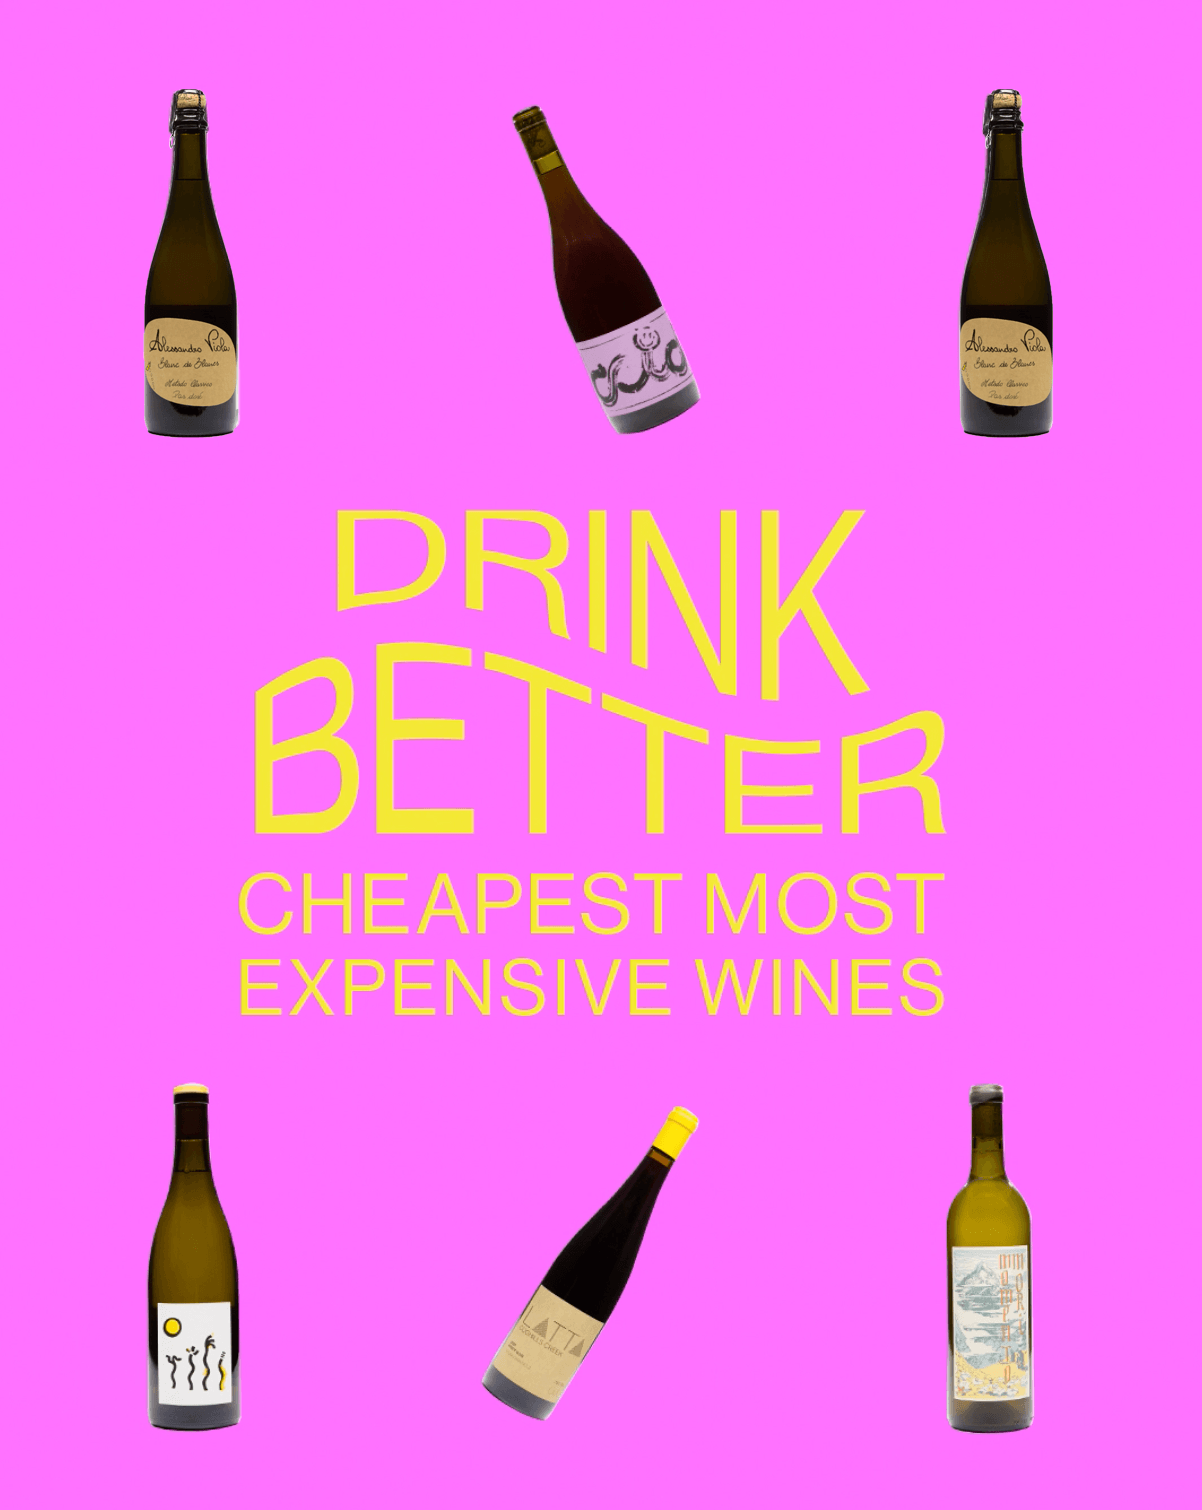 💅 DRINK BETTER Cheapest Most Expensive Wines - DRNKS